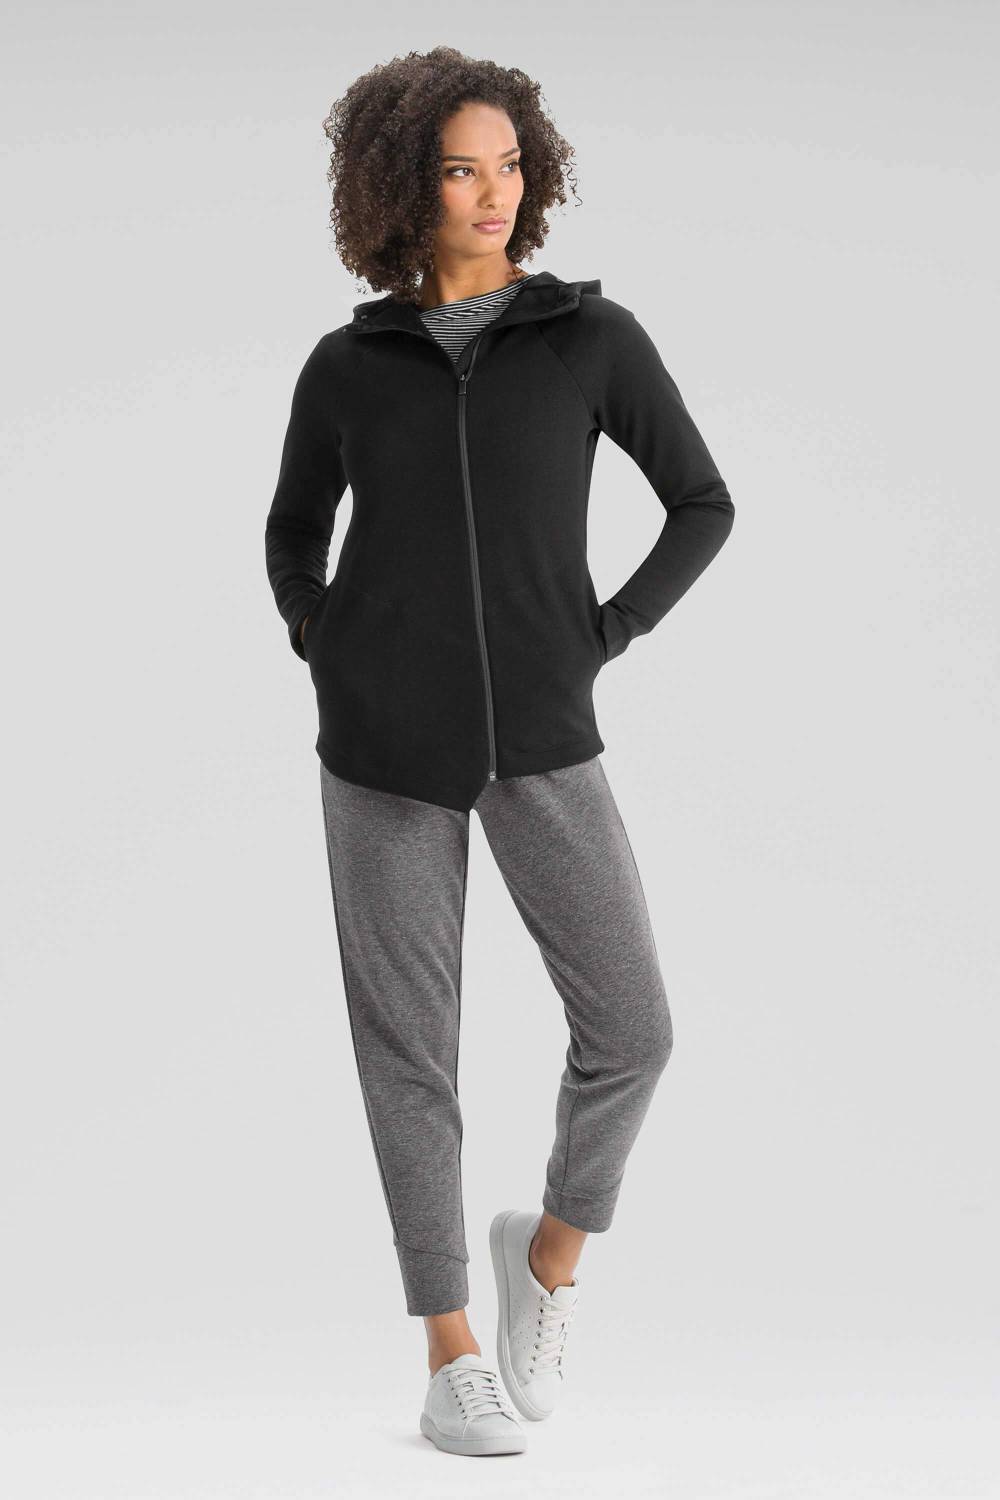 20 Best Affordable And Sustainable Loungewear Brands | Panaprium